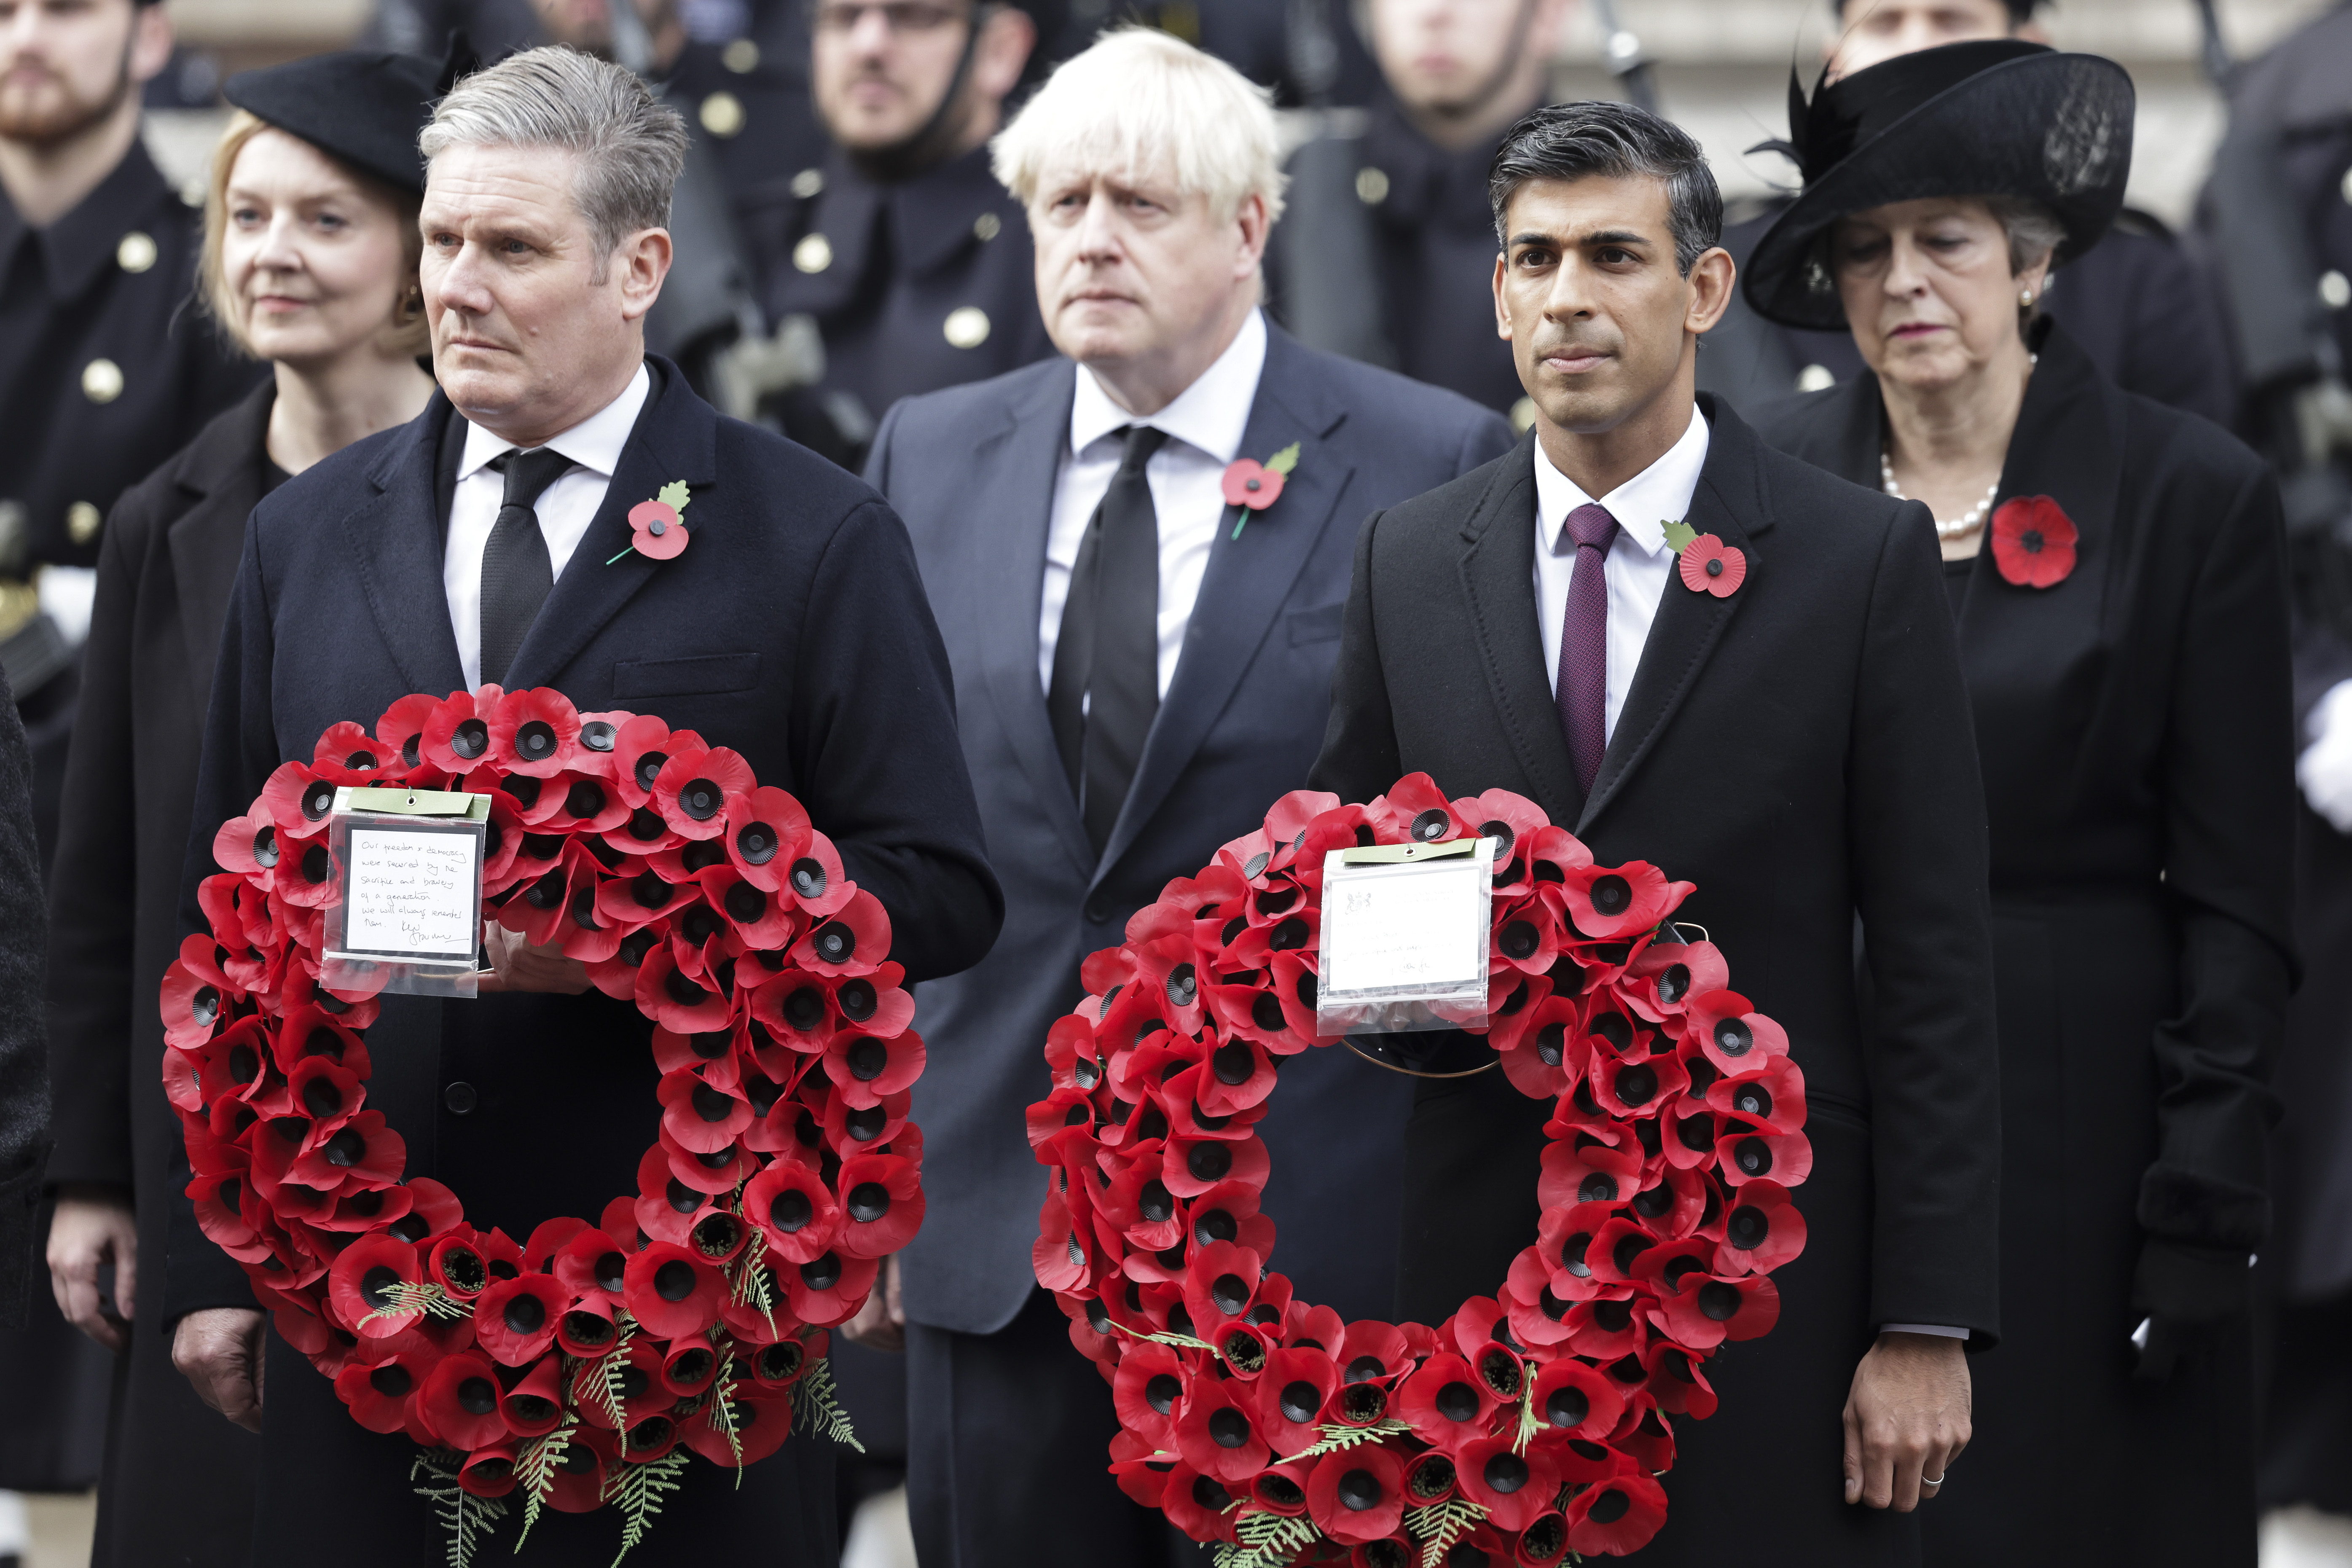 November, 2022: Rishi stands with Labour leader Keir Starmer and former Tory Prime Ministers Liz Truss, Boris Johnson and Theresa May at the Cenotaph